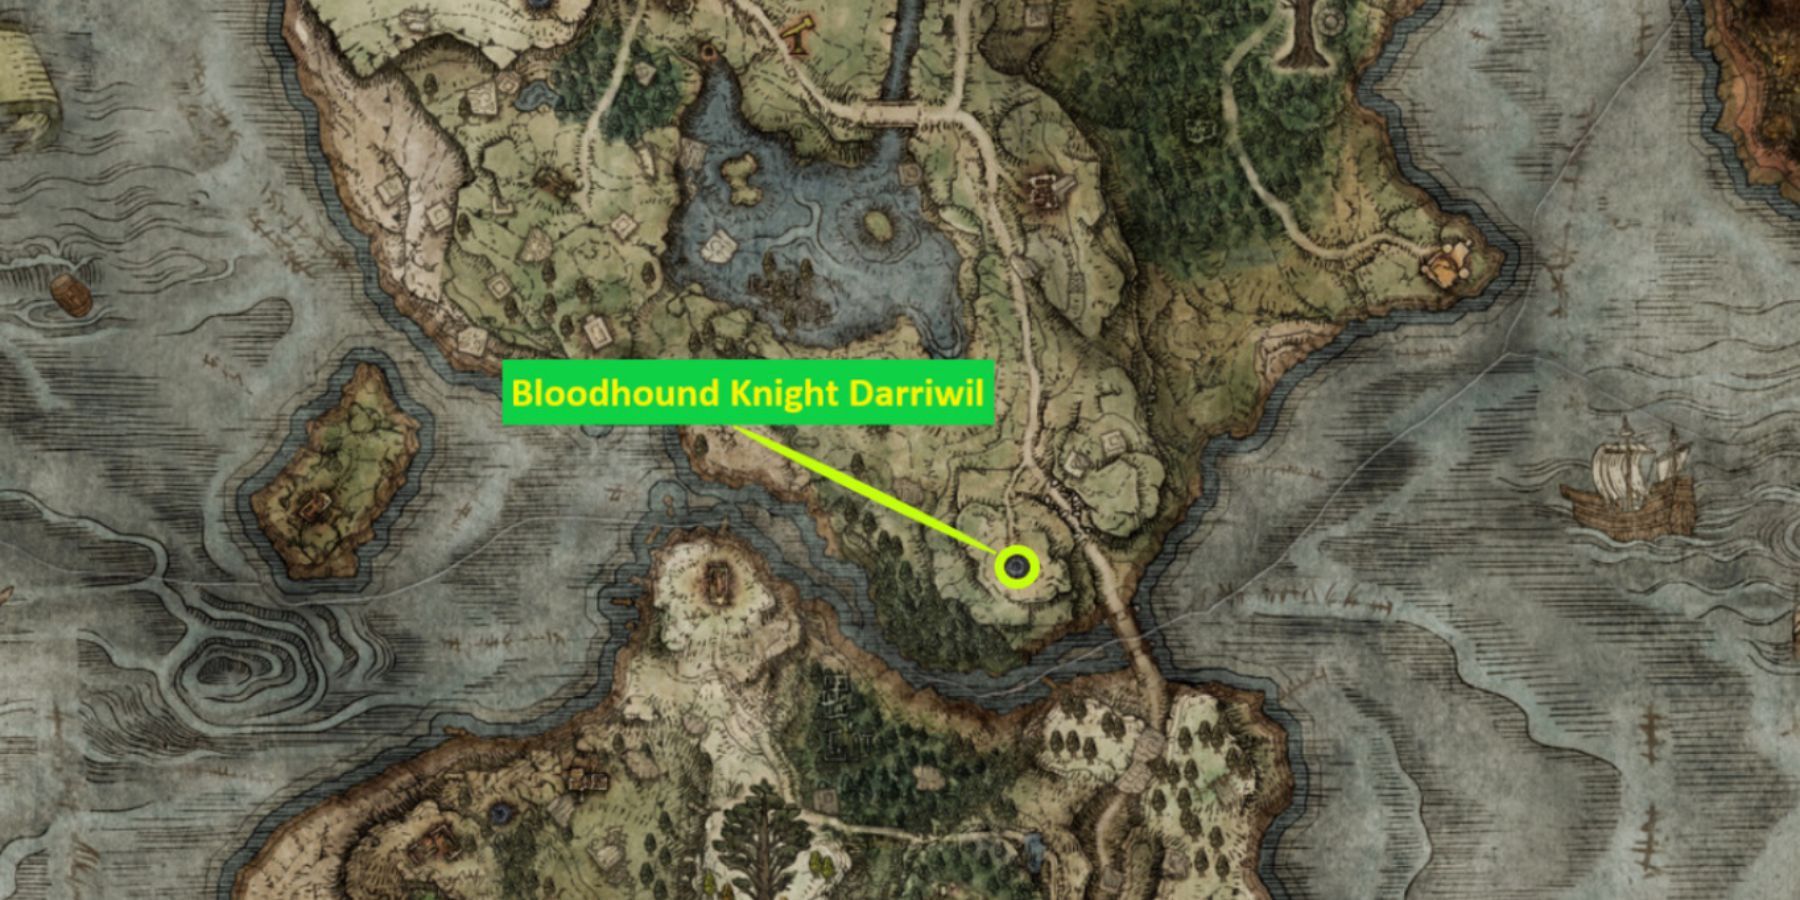 Elden Ring: Bloodhound Knight Darriwil location on the map